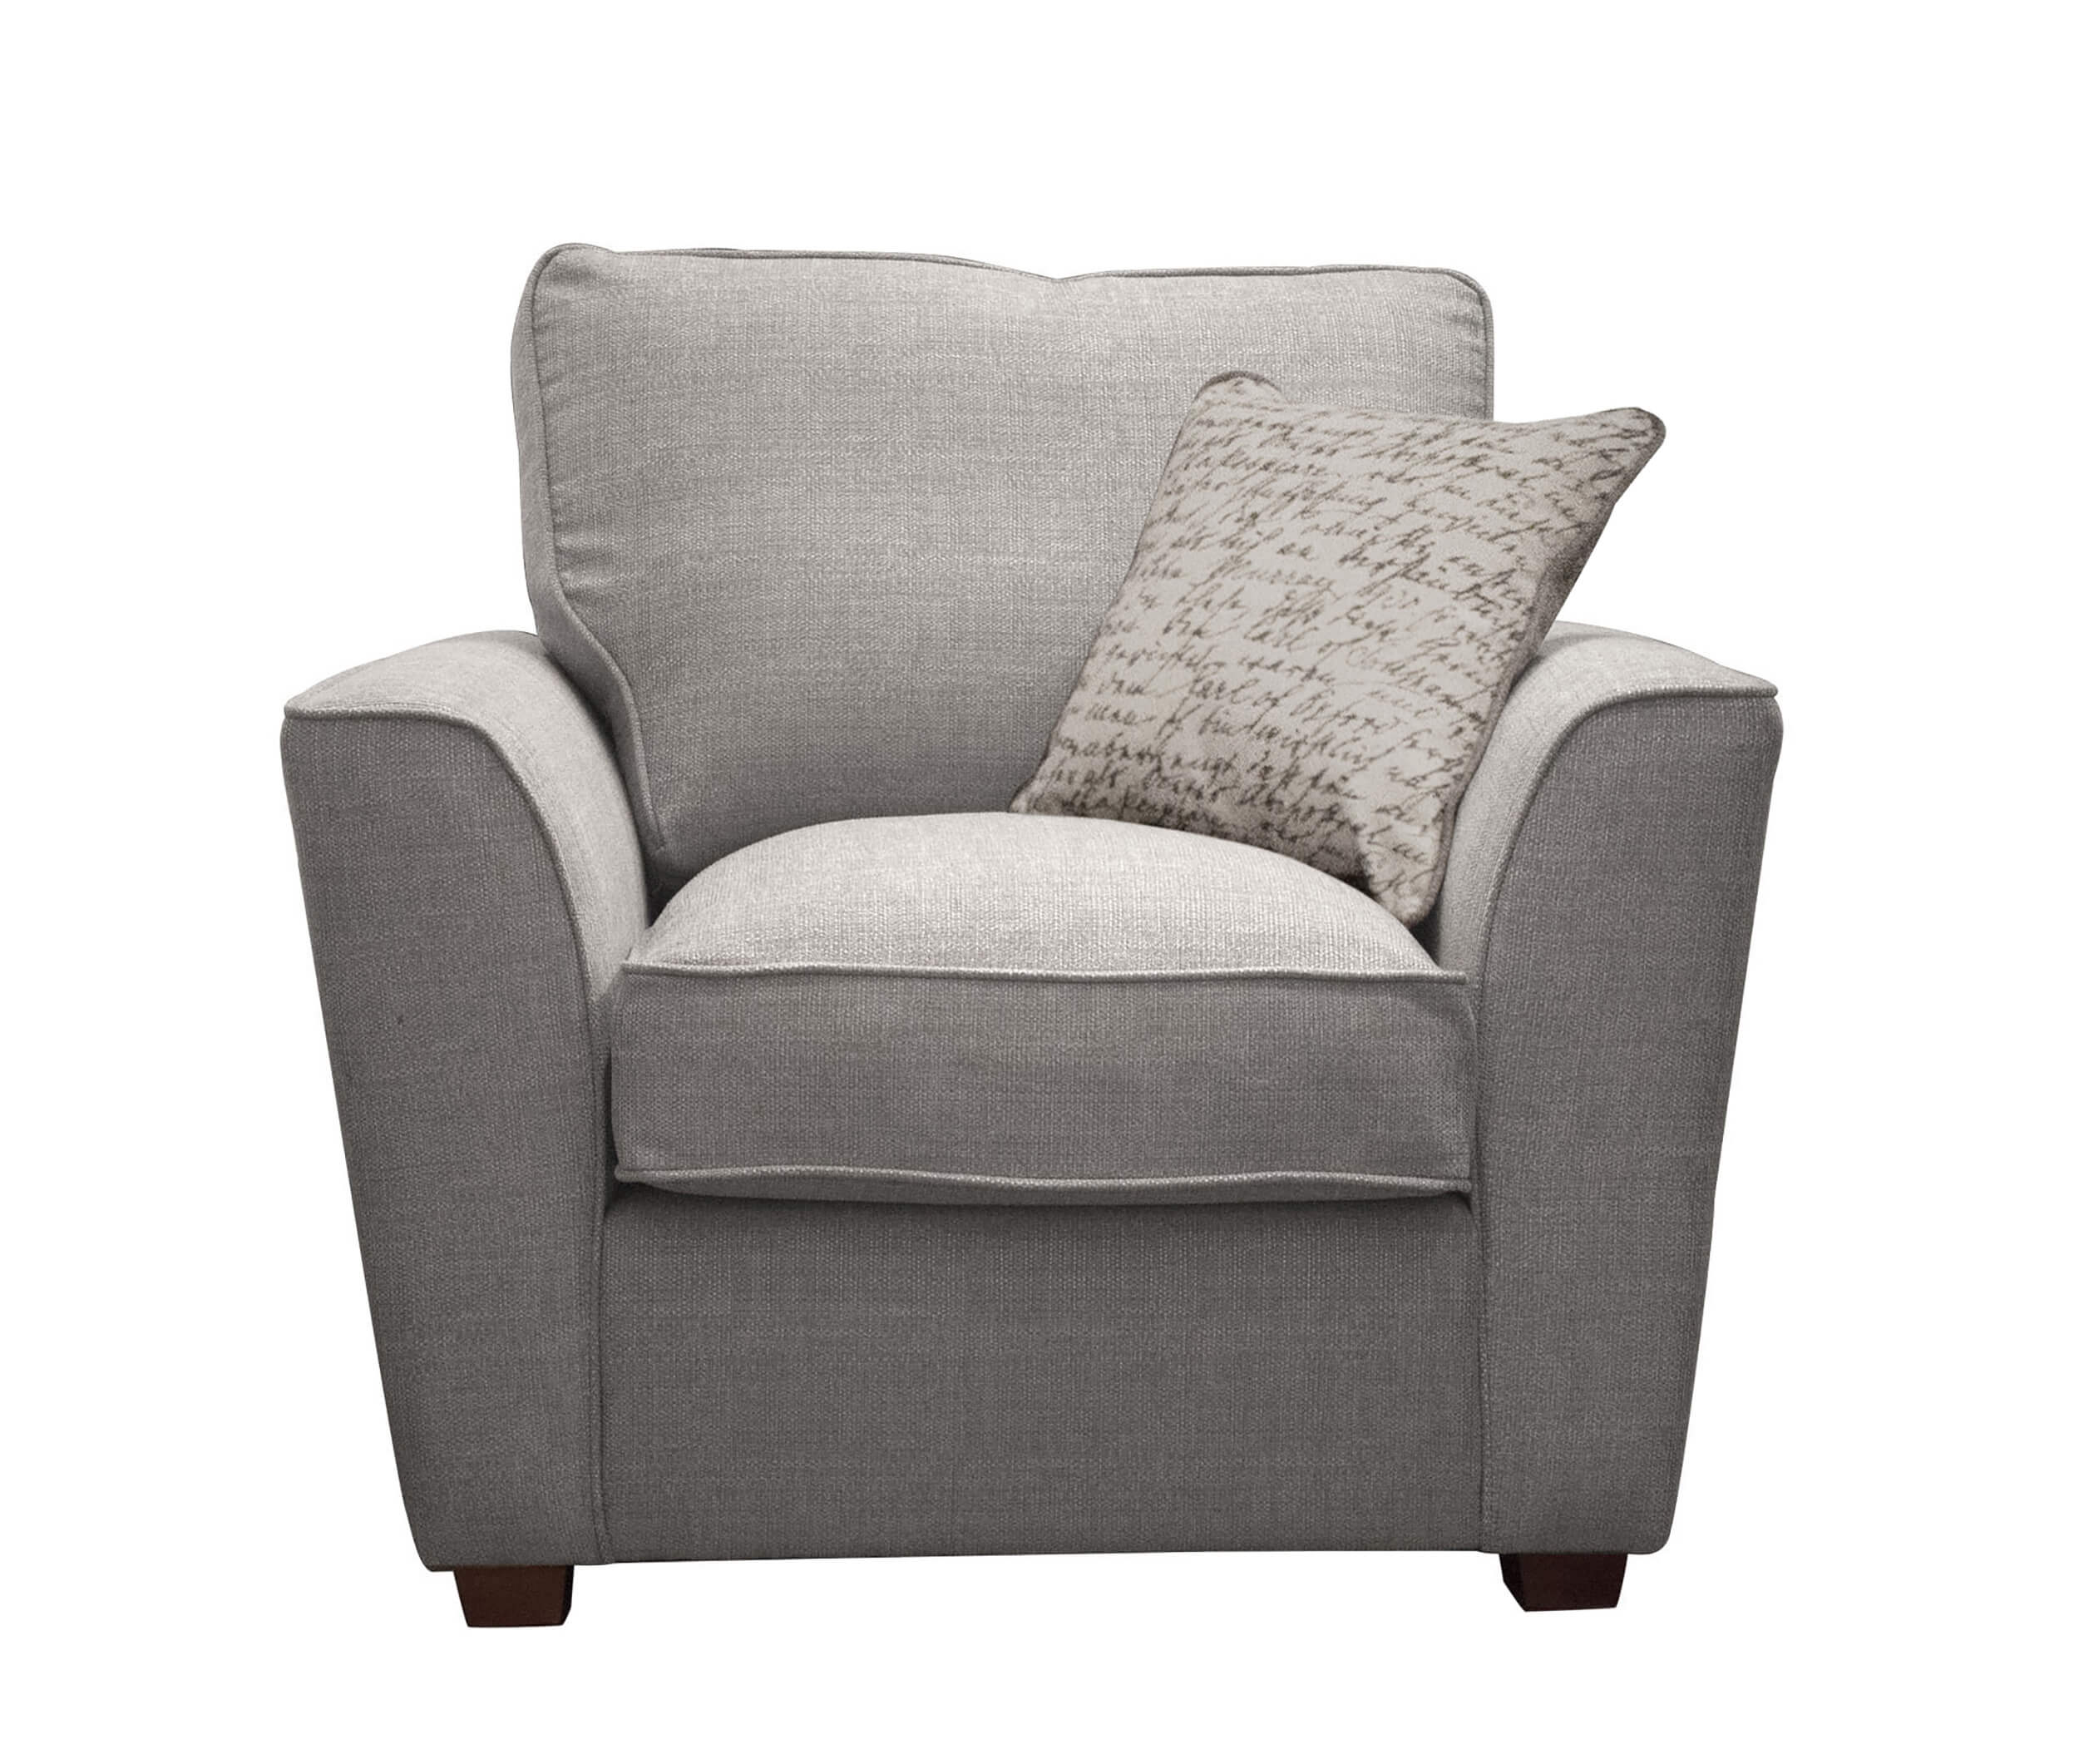 Showing image for Washington armchair